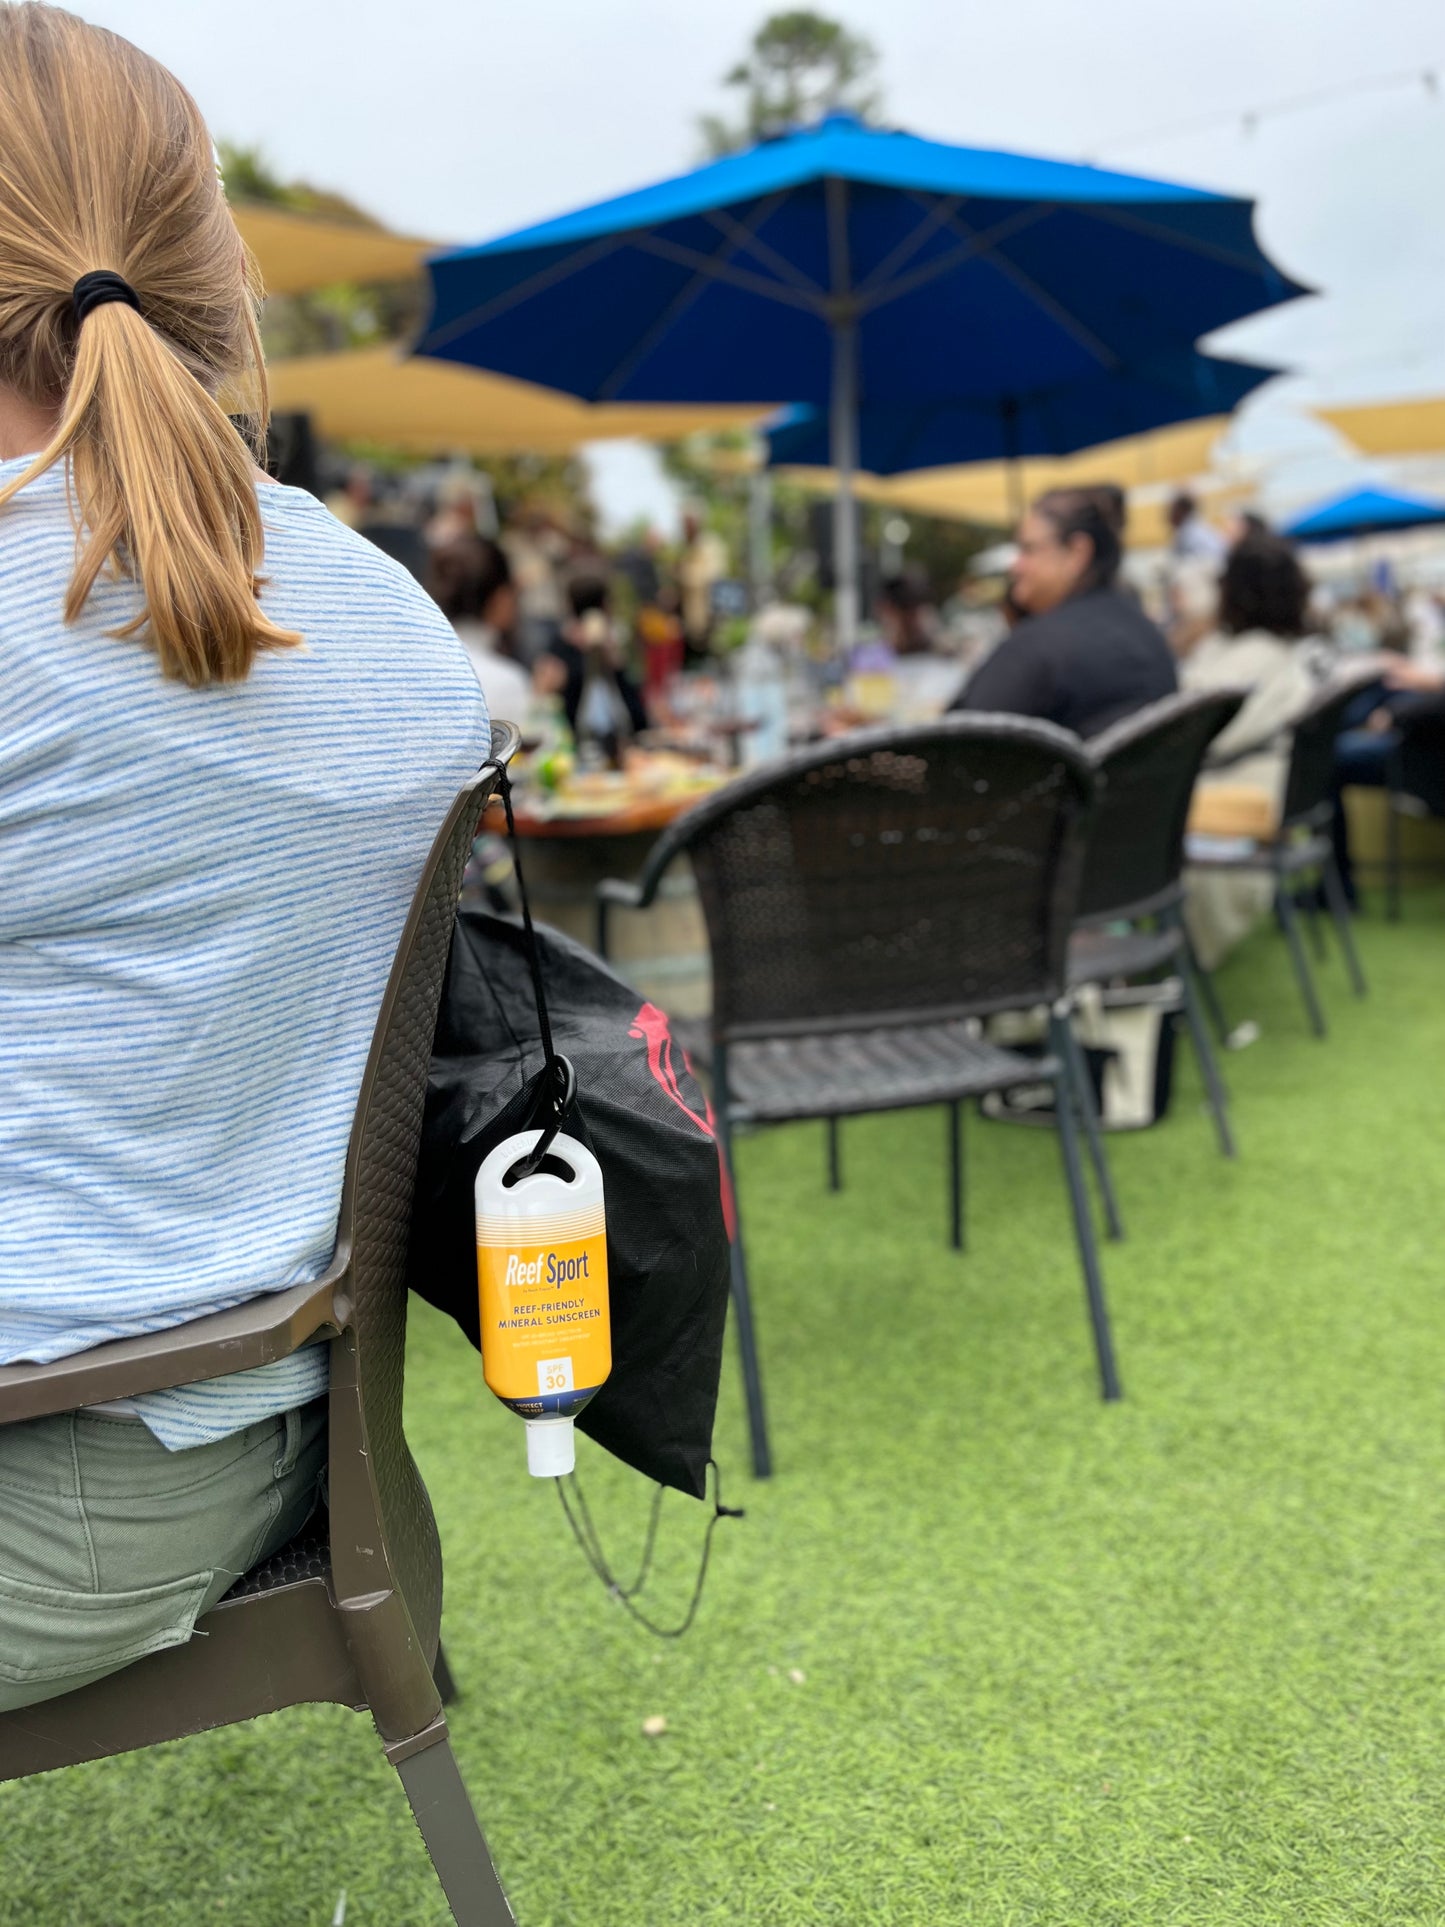 XL Sunscreen Flasks: Your Hidden Solution for Sneaking Alcohol